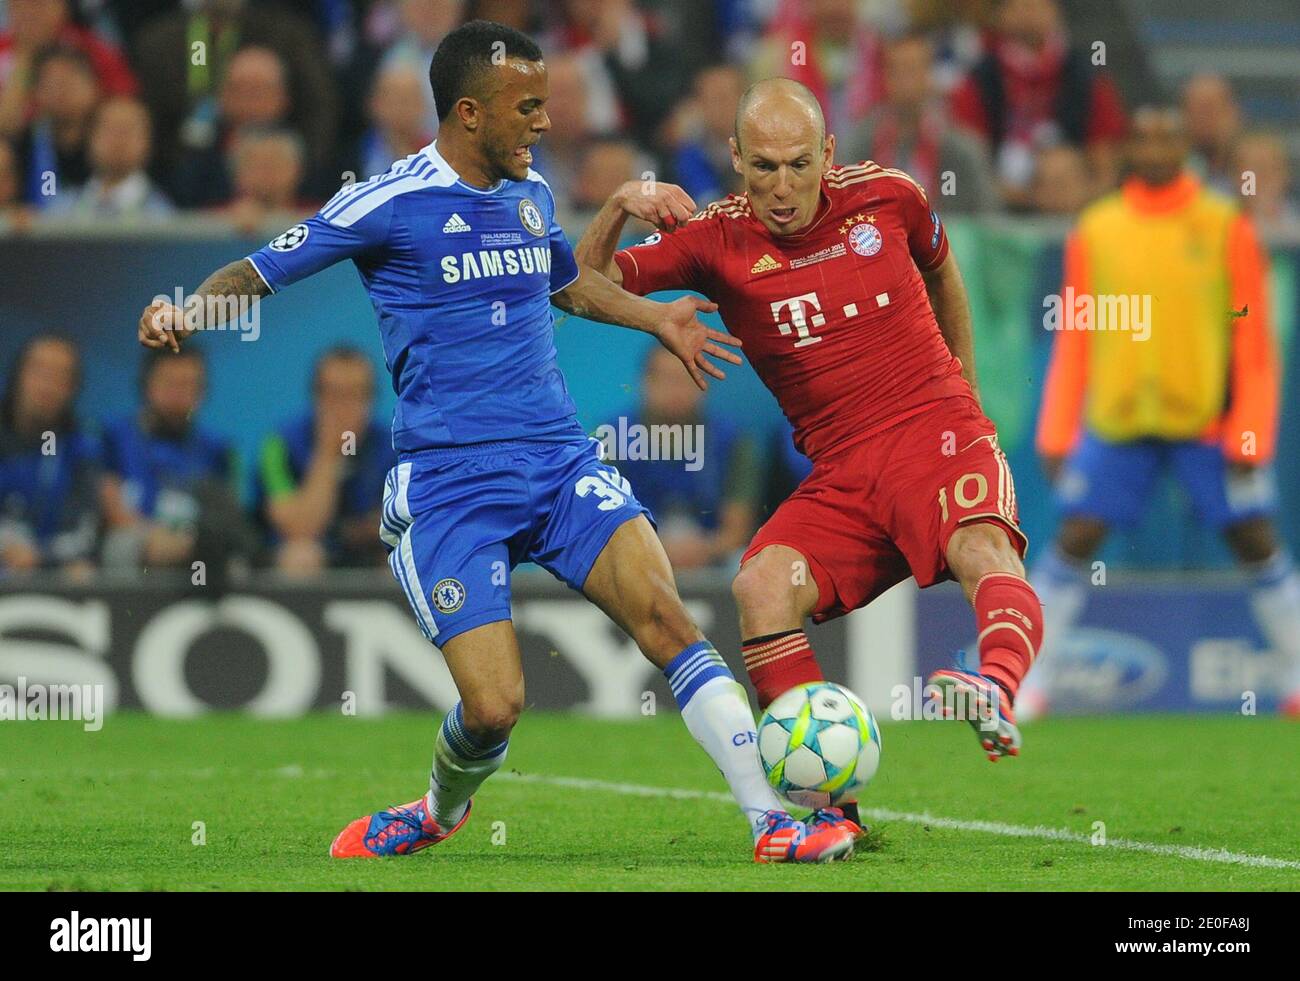 Chelsea's Ashley Cole and Bayern's Arjen Robben during the UEFA Champions  League Final soccer match, Bayern Vs Chelsea FC at Allianz Arena in Munich,  Germany on May 19, 2012. Chelsea won 1-1 (